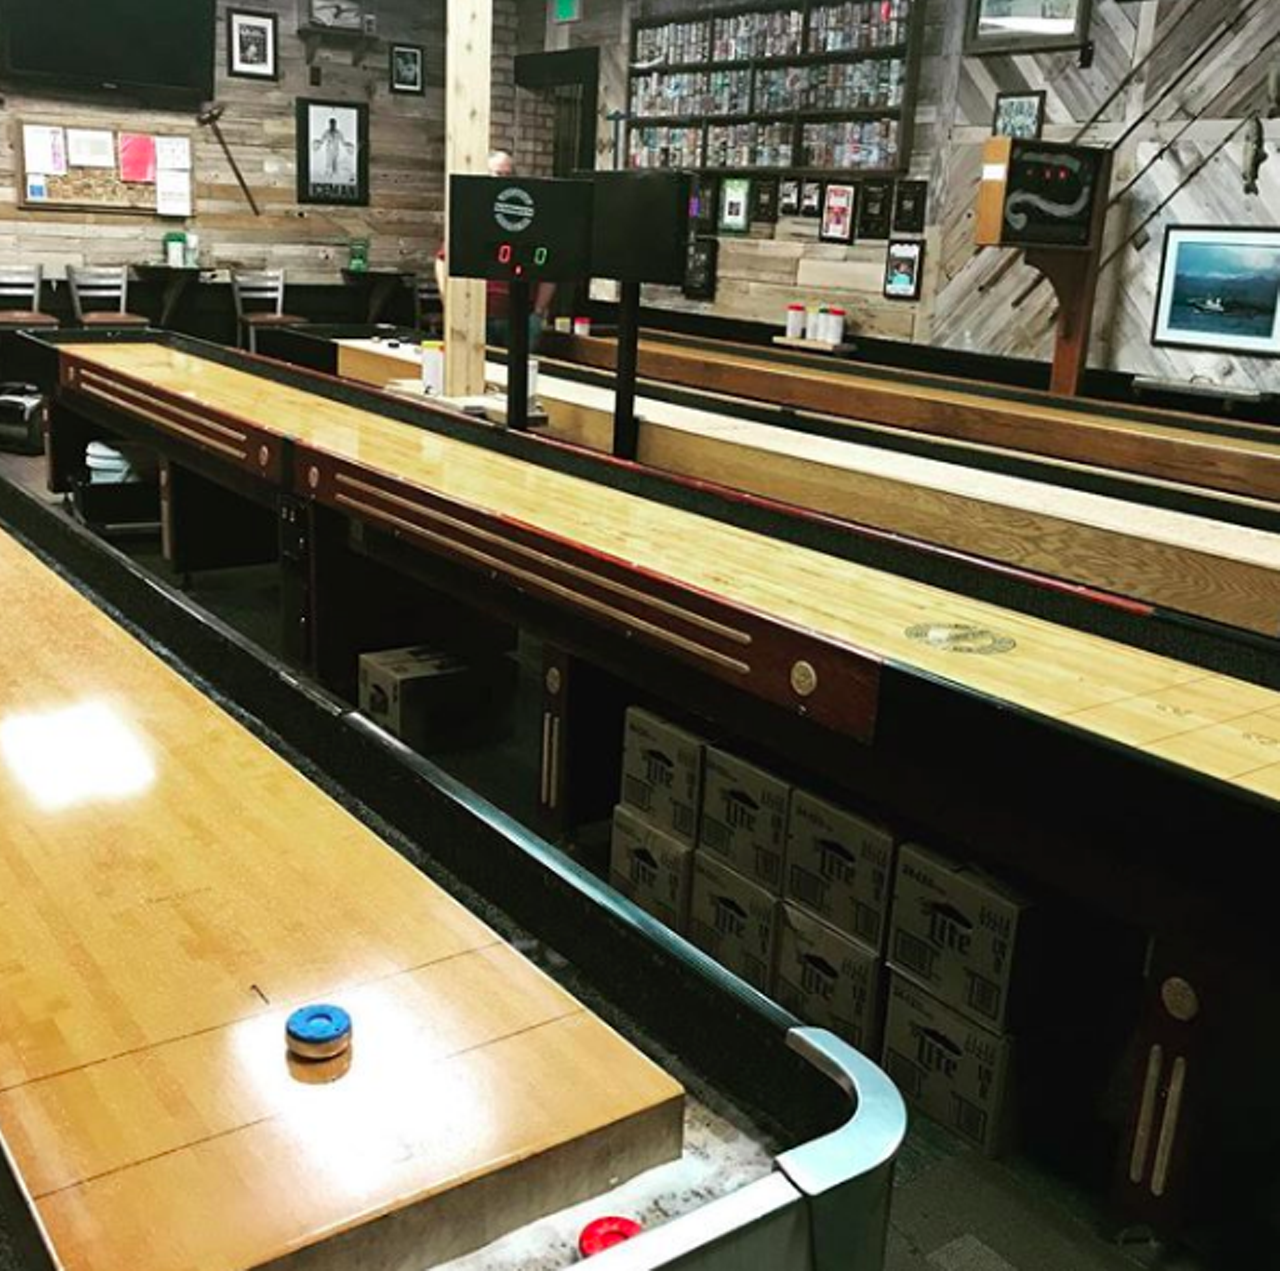 Rookies Bar is a self-proclaimed “laid-back watering hole” with a lot more to offer than just beer. Although the bar has a wide selection of drinks, the star feature of Rookies is the sectioned off shuffleboard arena that holds local and nationwide tournaments. There’s also billiards and karaoke to partake in between games.
Photo via Instagram / september29th